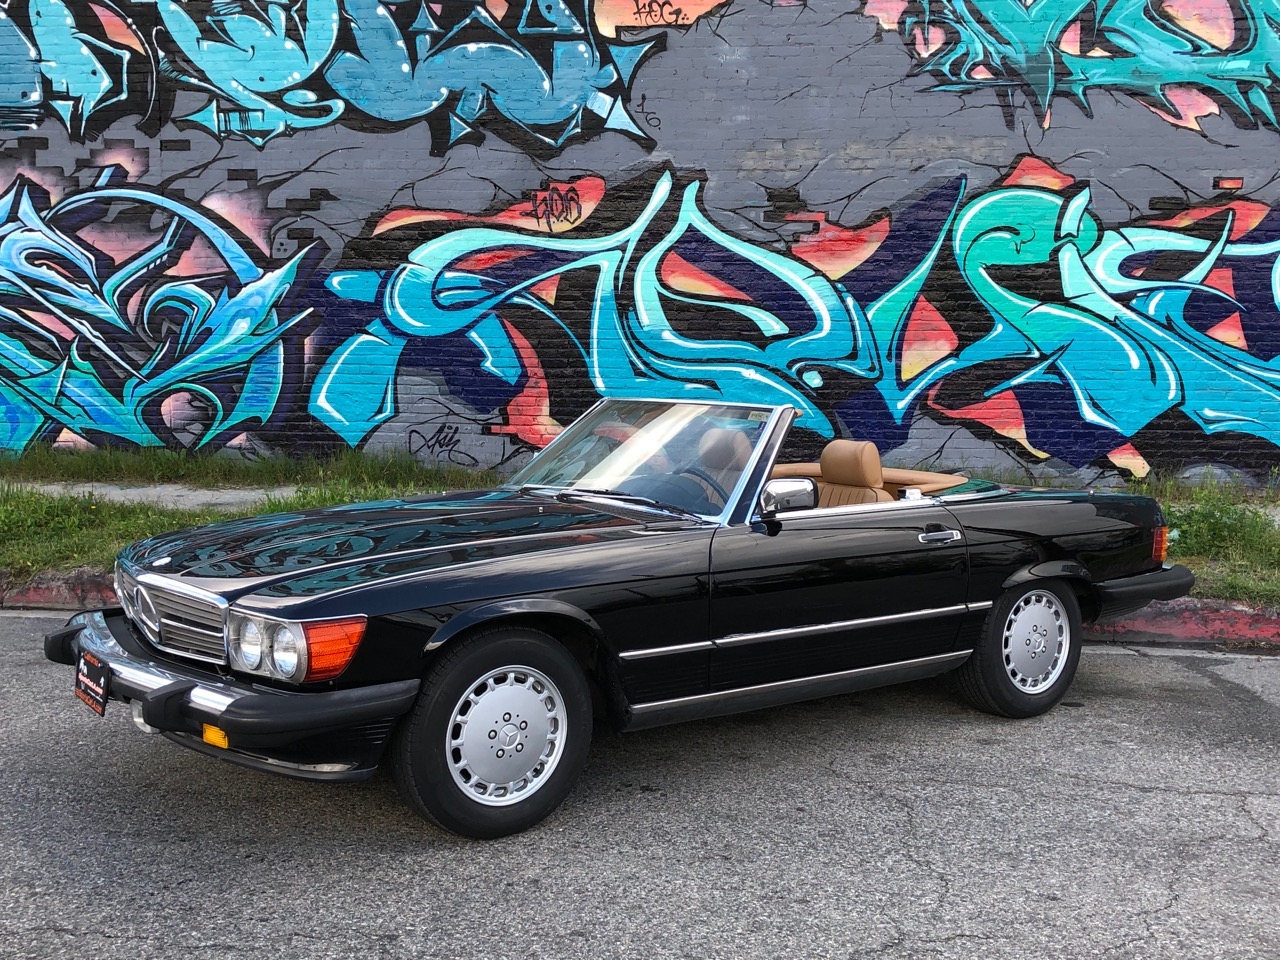 Used 1986 Mercedes Benz 560 Class 560 SL 2dr Convertible